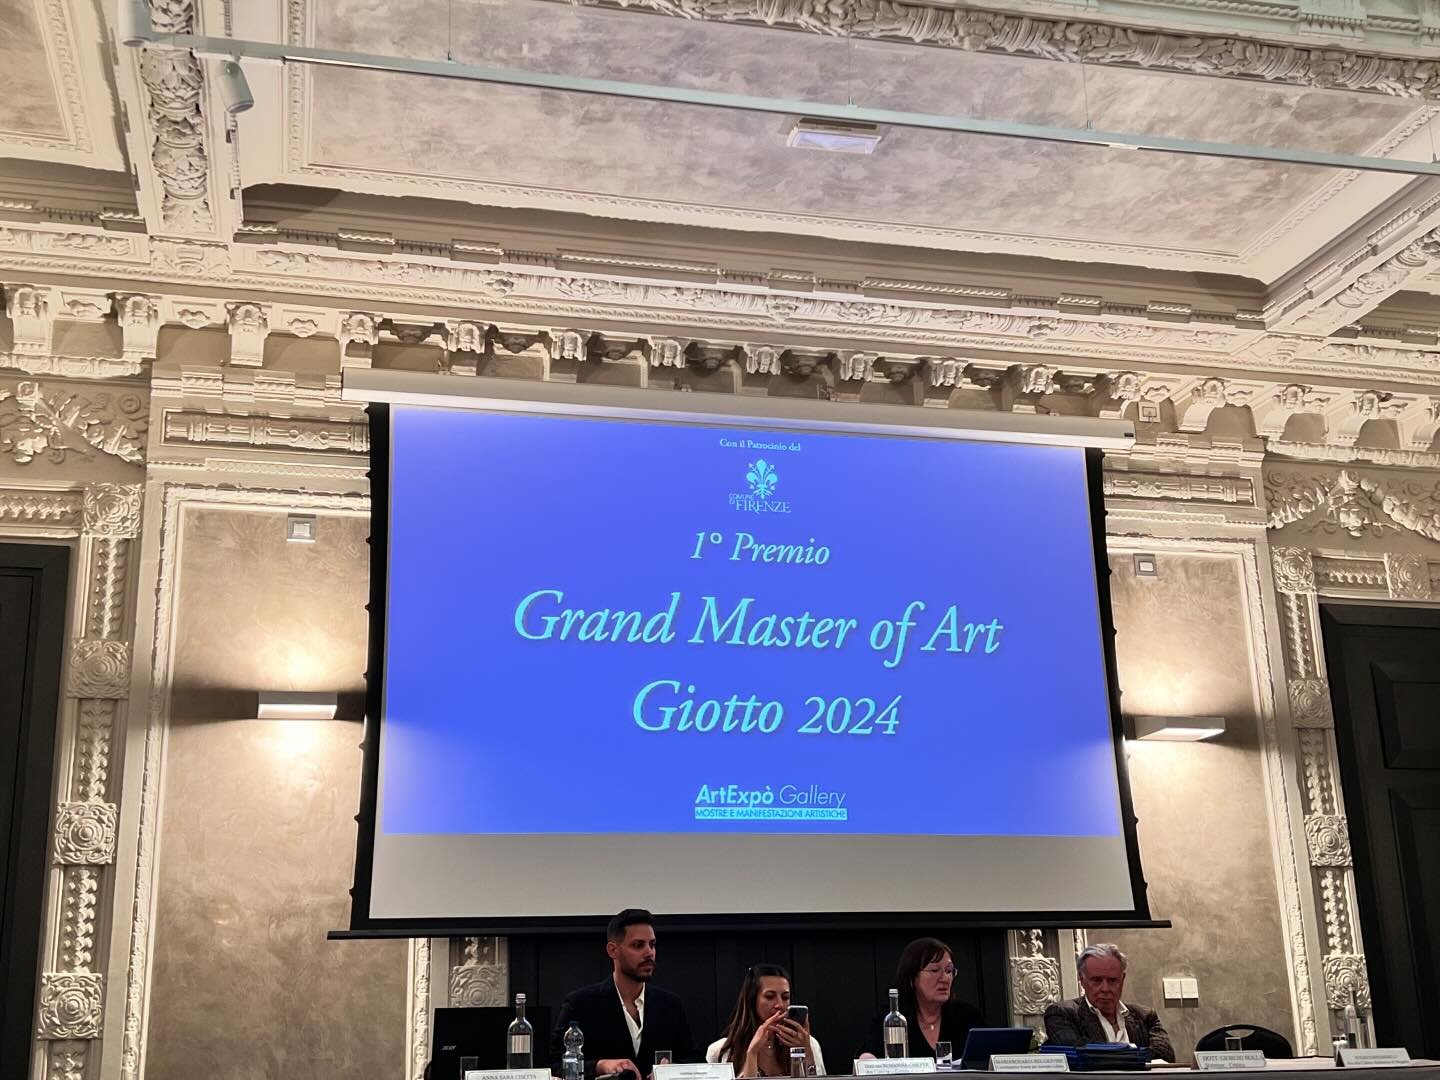 Saturday 6th April, at the Grand Hotel Baglioni in Florence, took part the ceremony of the award &ldquo;Grand Master of Art Giotto 2024&rdquo;.
Thank you to @artexpo_gallery for being selected  and awarded with this prize.

#artexpogallery #artfirenz